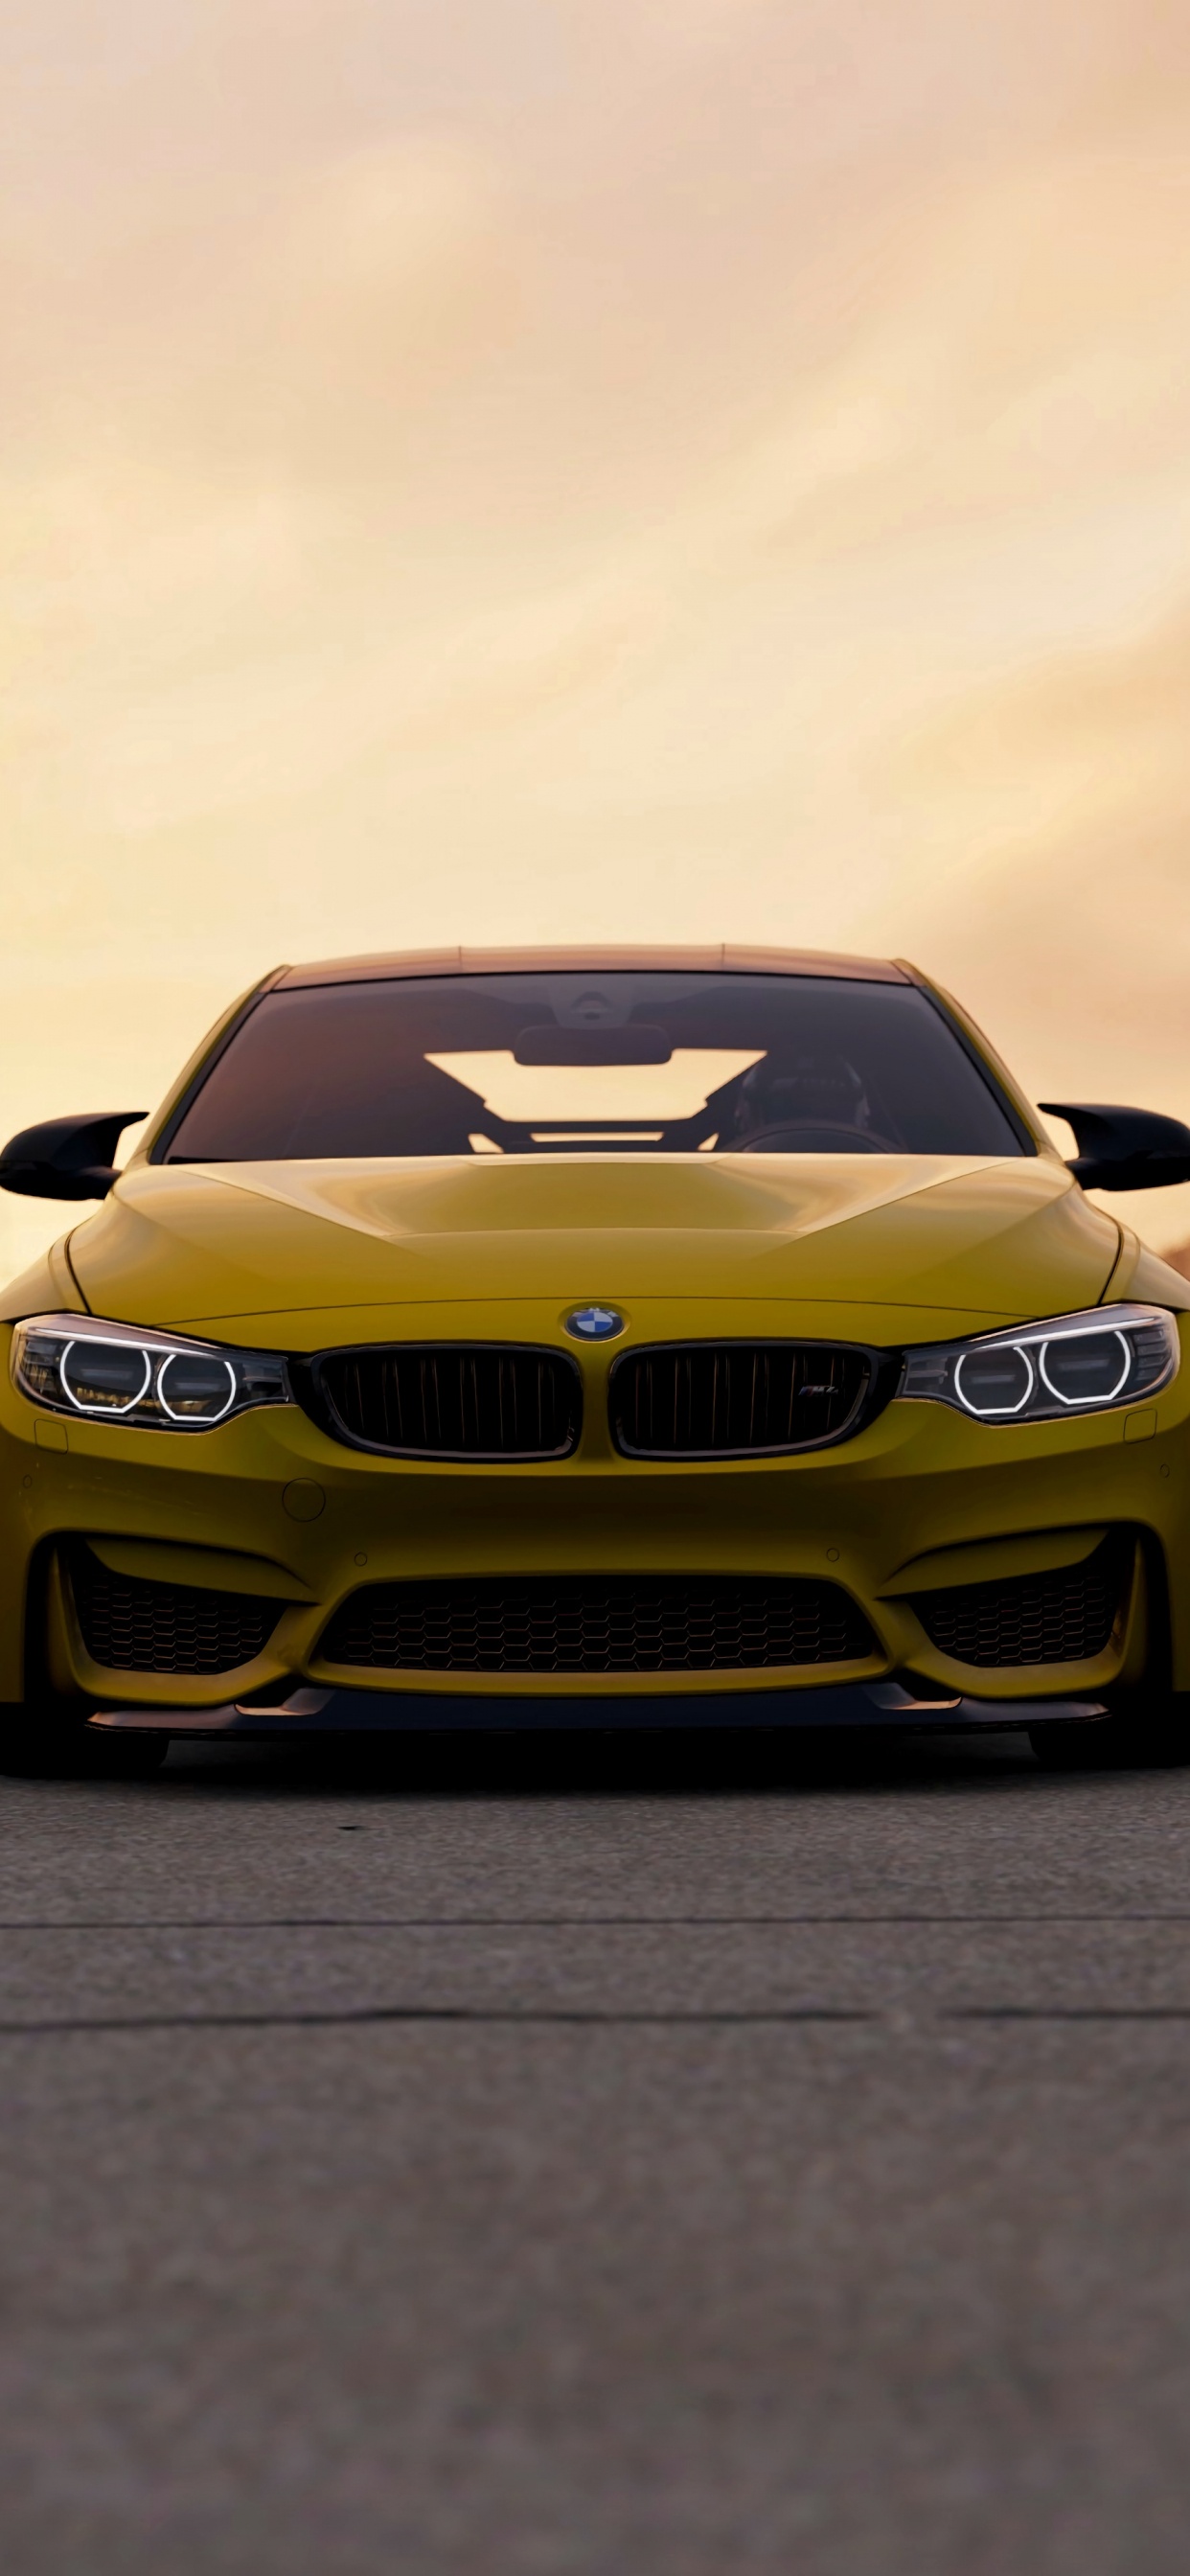 Brown Bmw m 3 on Road. Wallpaper in 1242x2688 Resolution